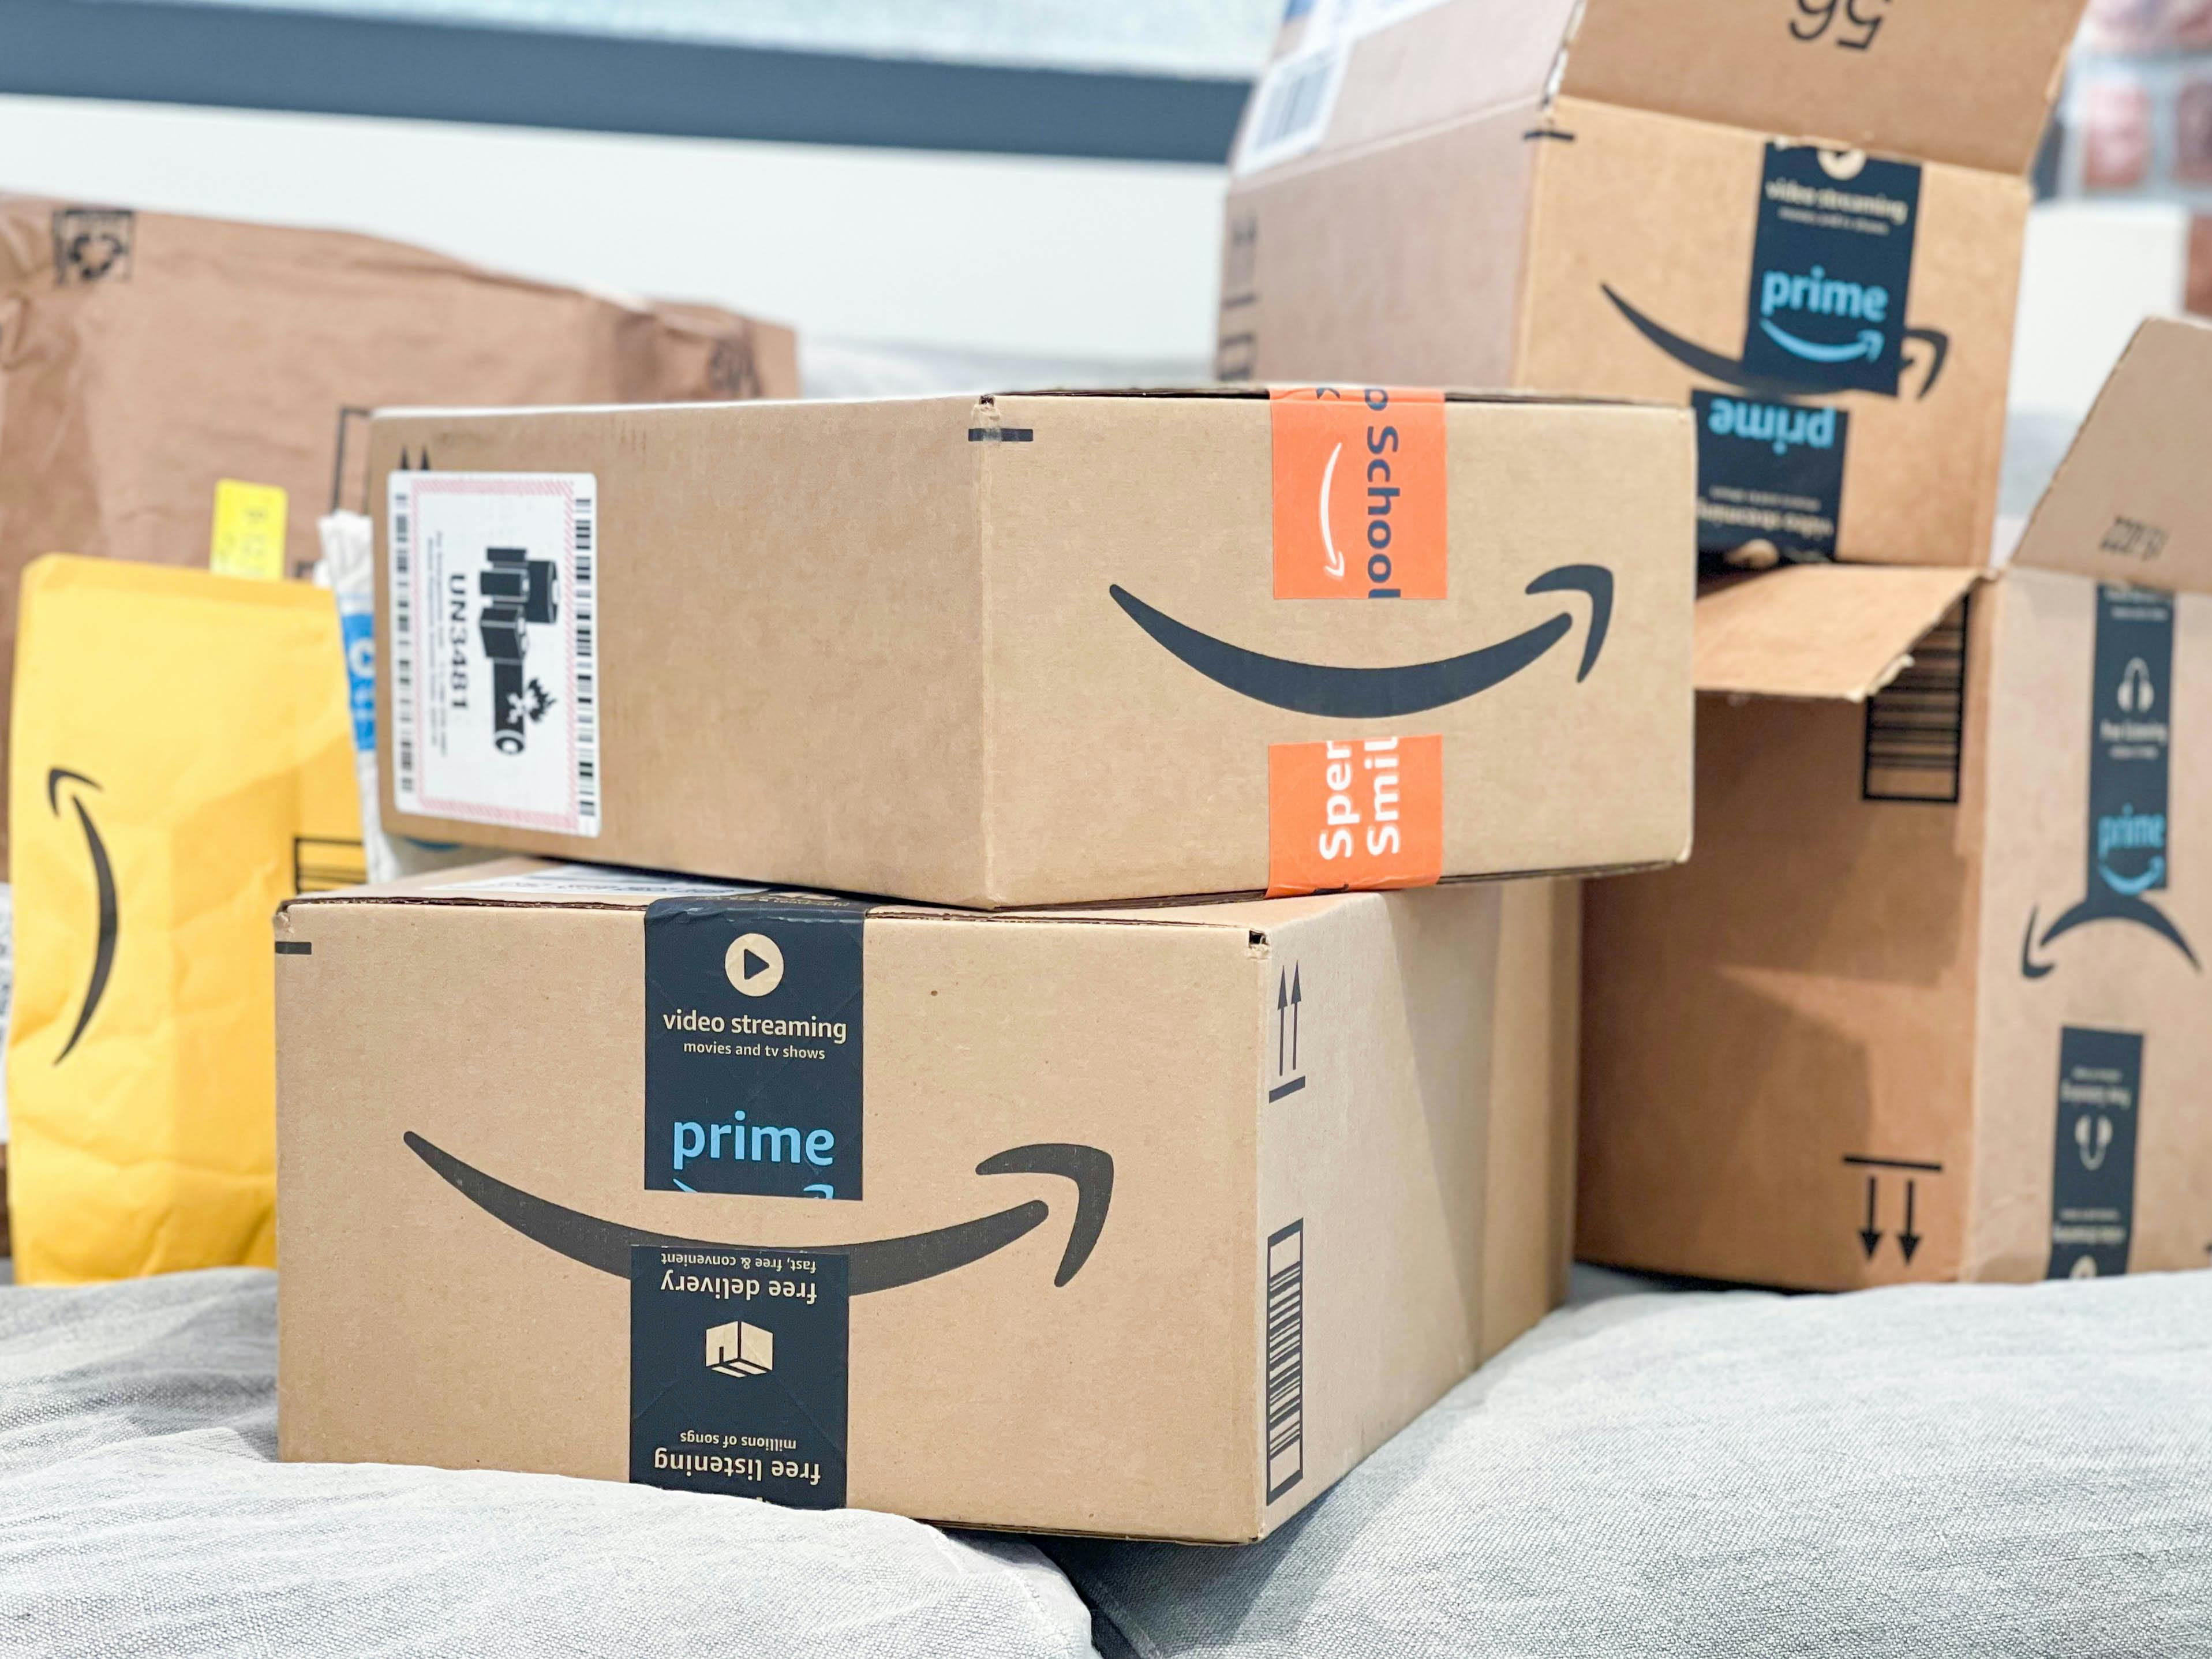 A bunch of Amazon packages and boxes stacked on a couch.